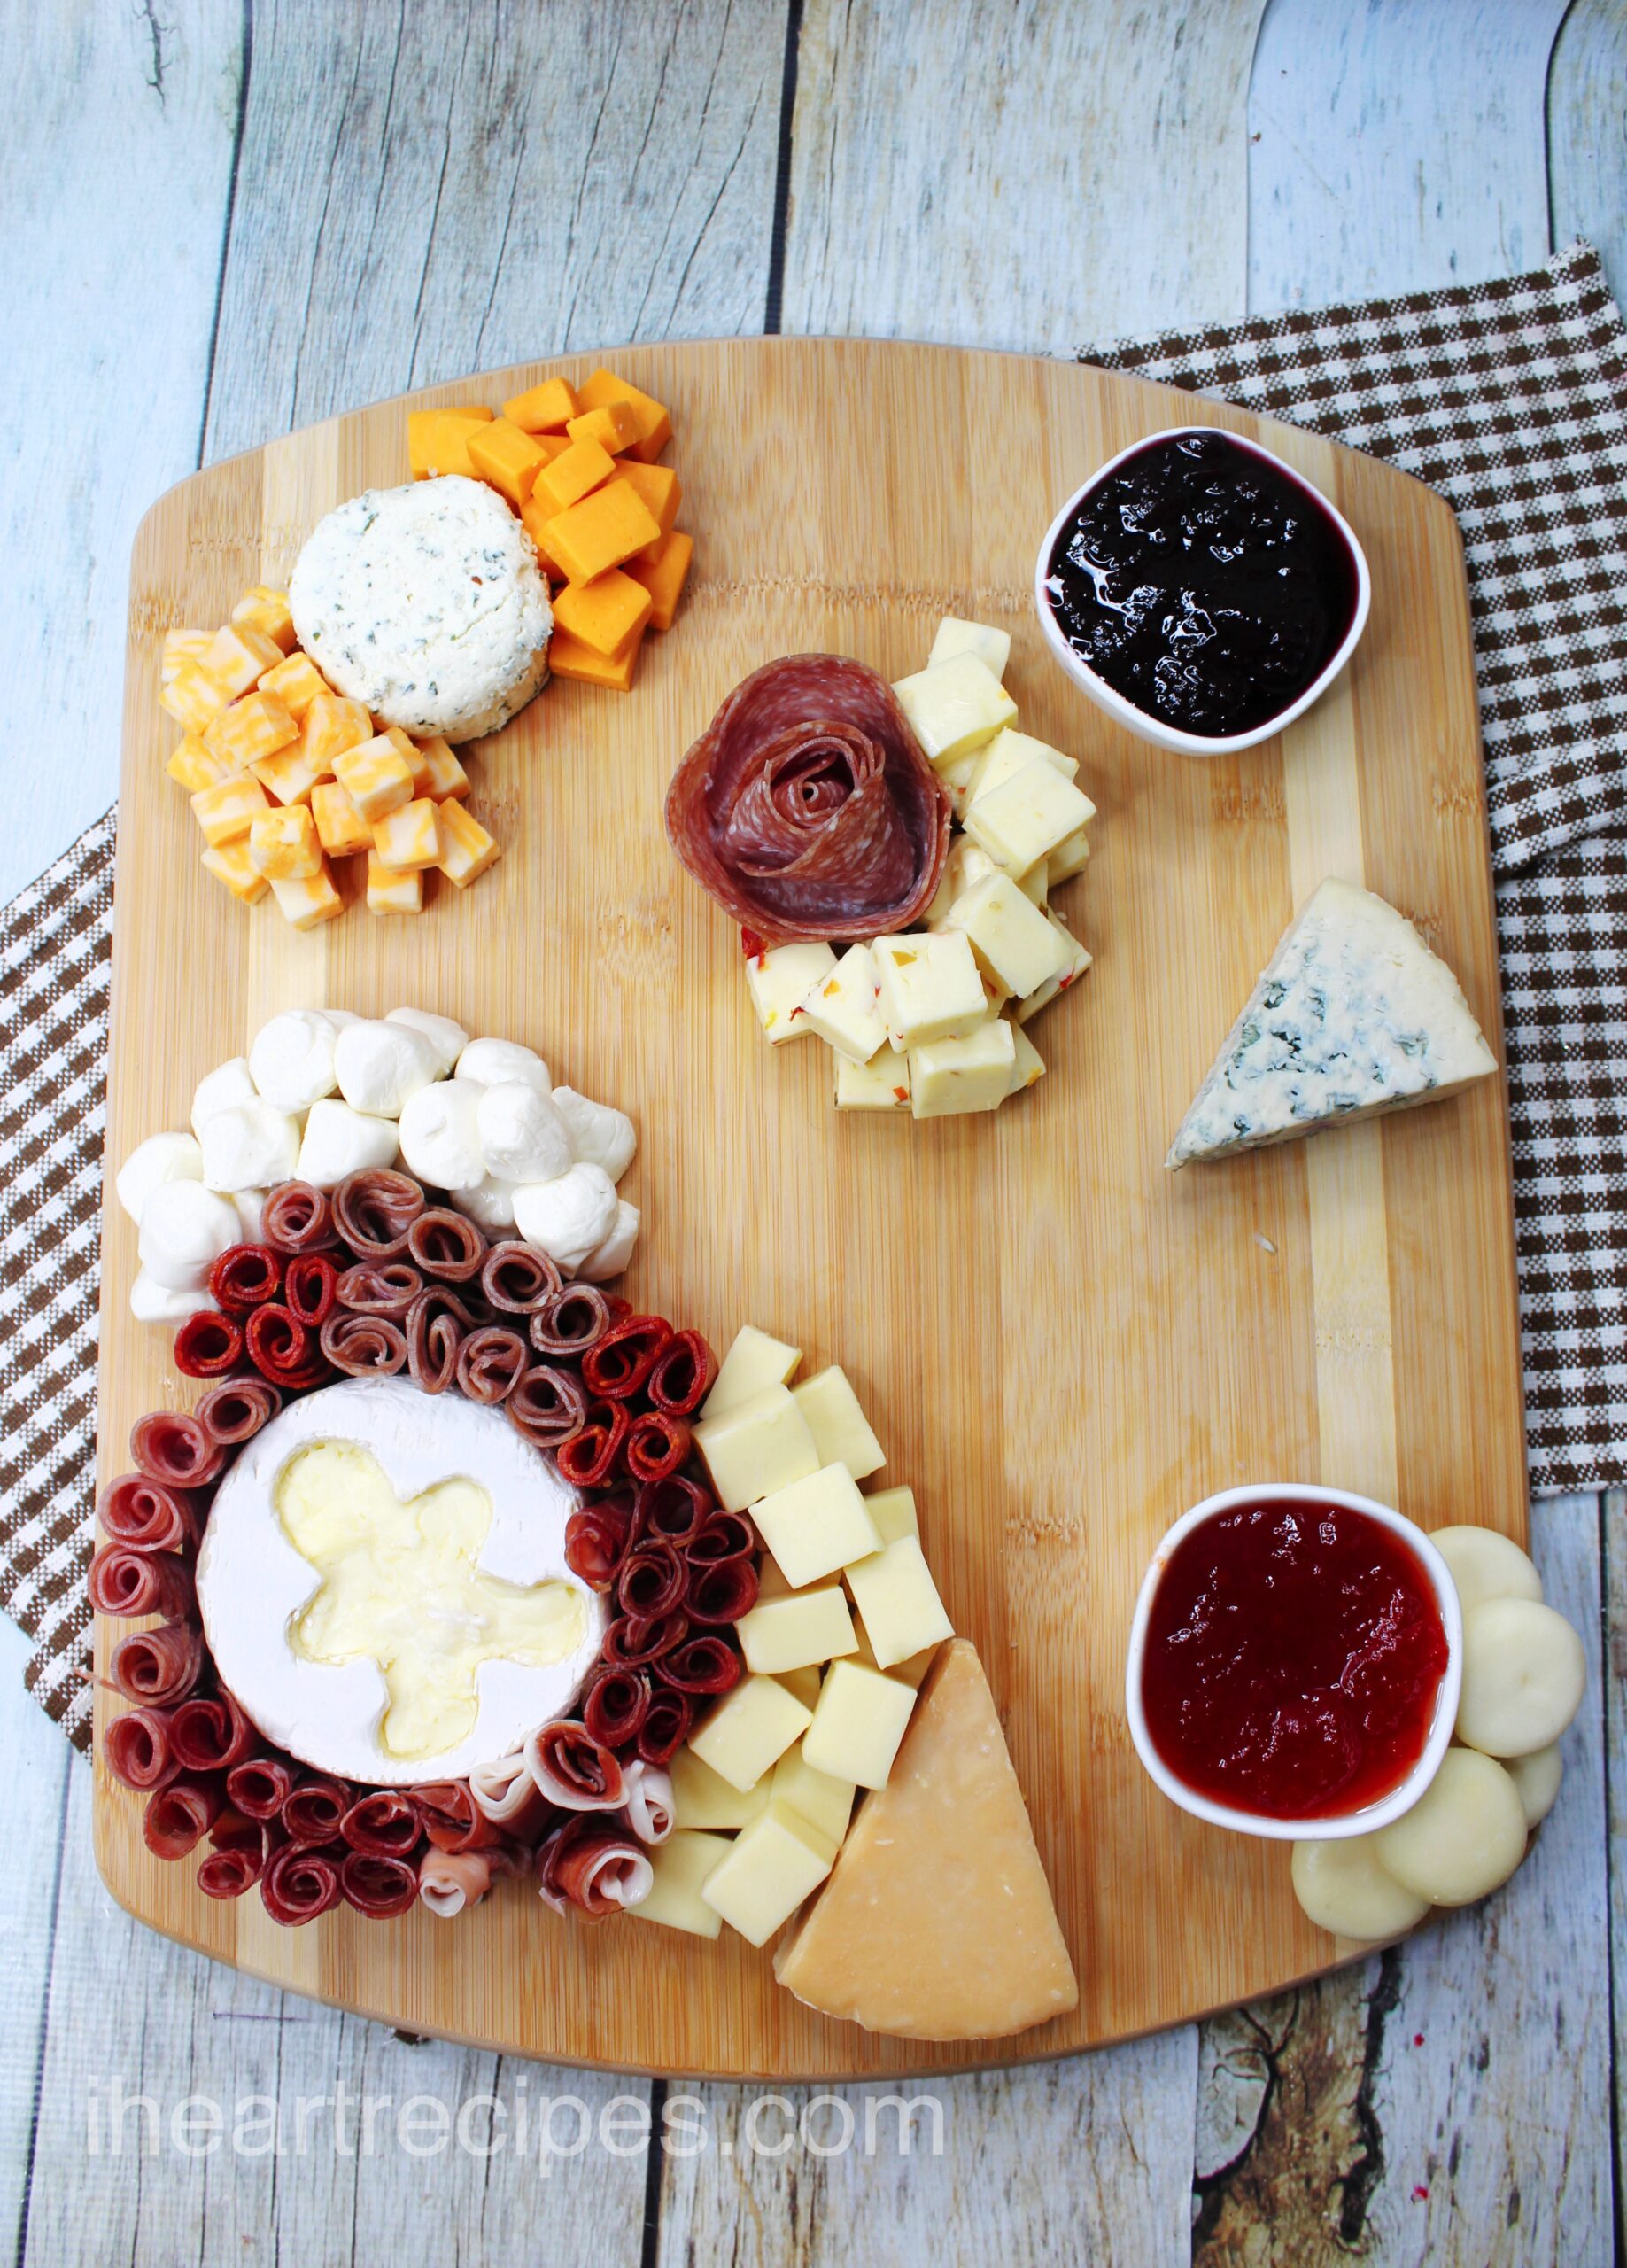 An overhead image showing the process of putting together a Christmas Charcuterie Board with cubed cheeses, jams, and rolled sliced meats arranged on a wooden cutting board.